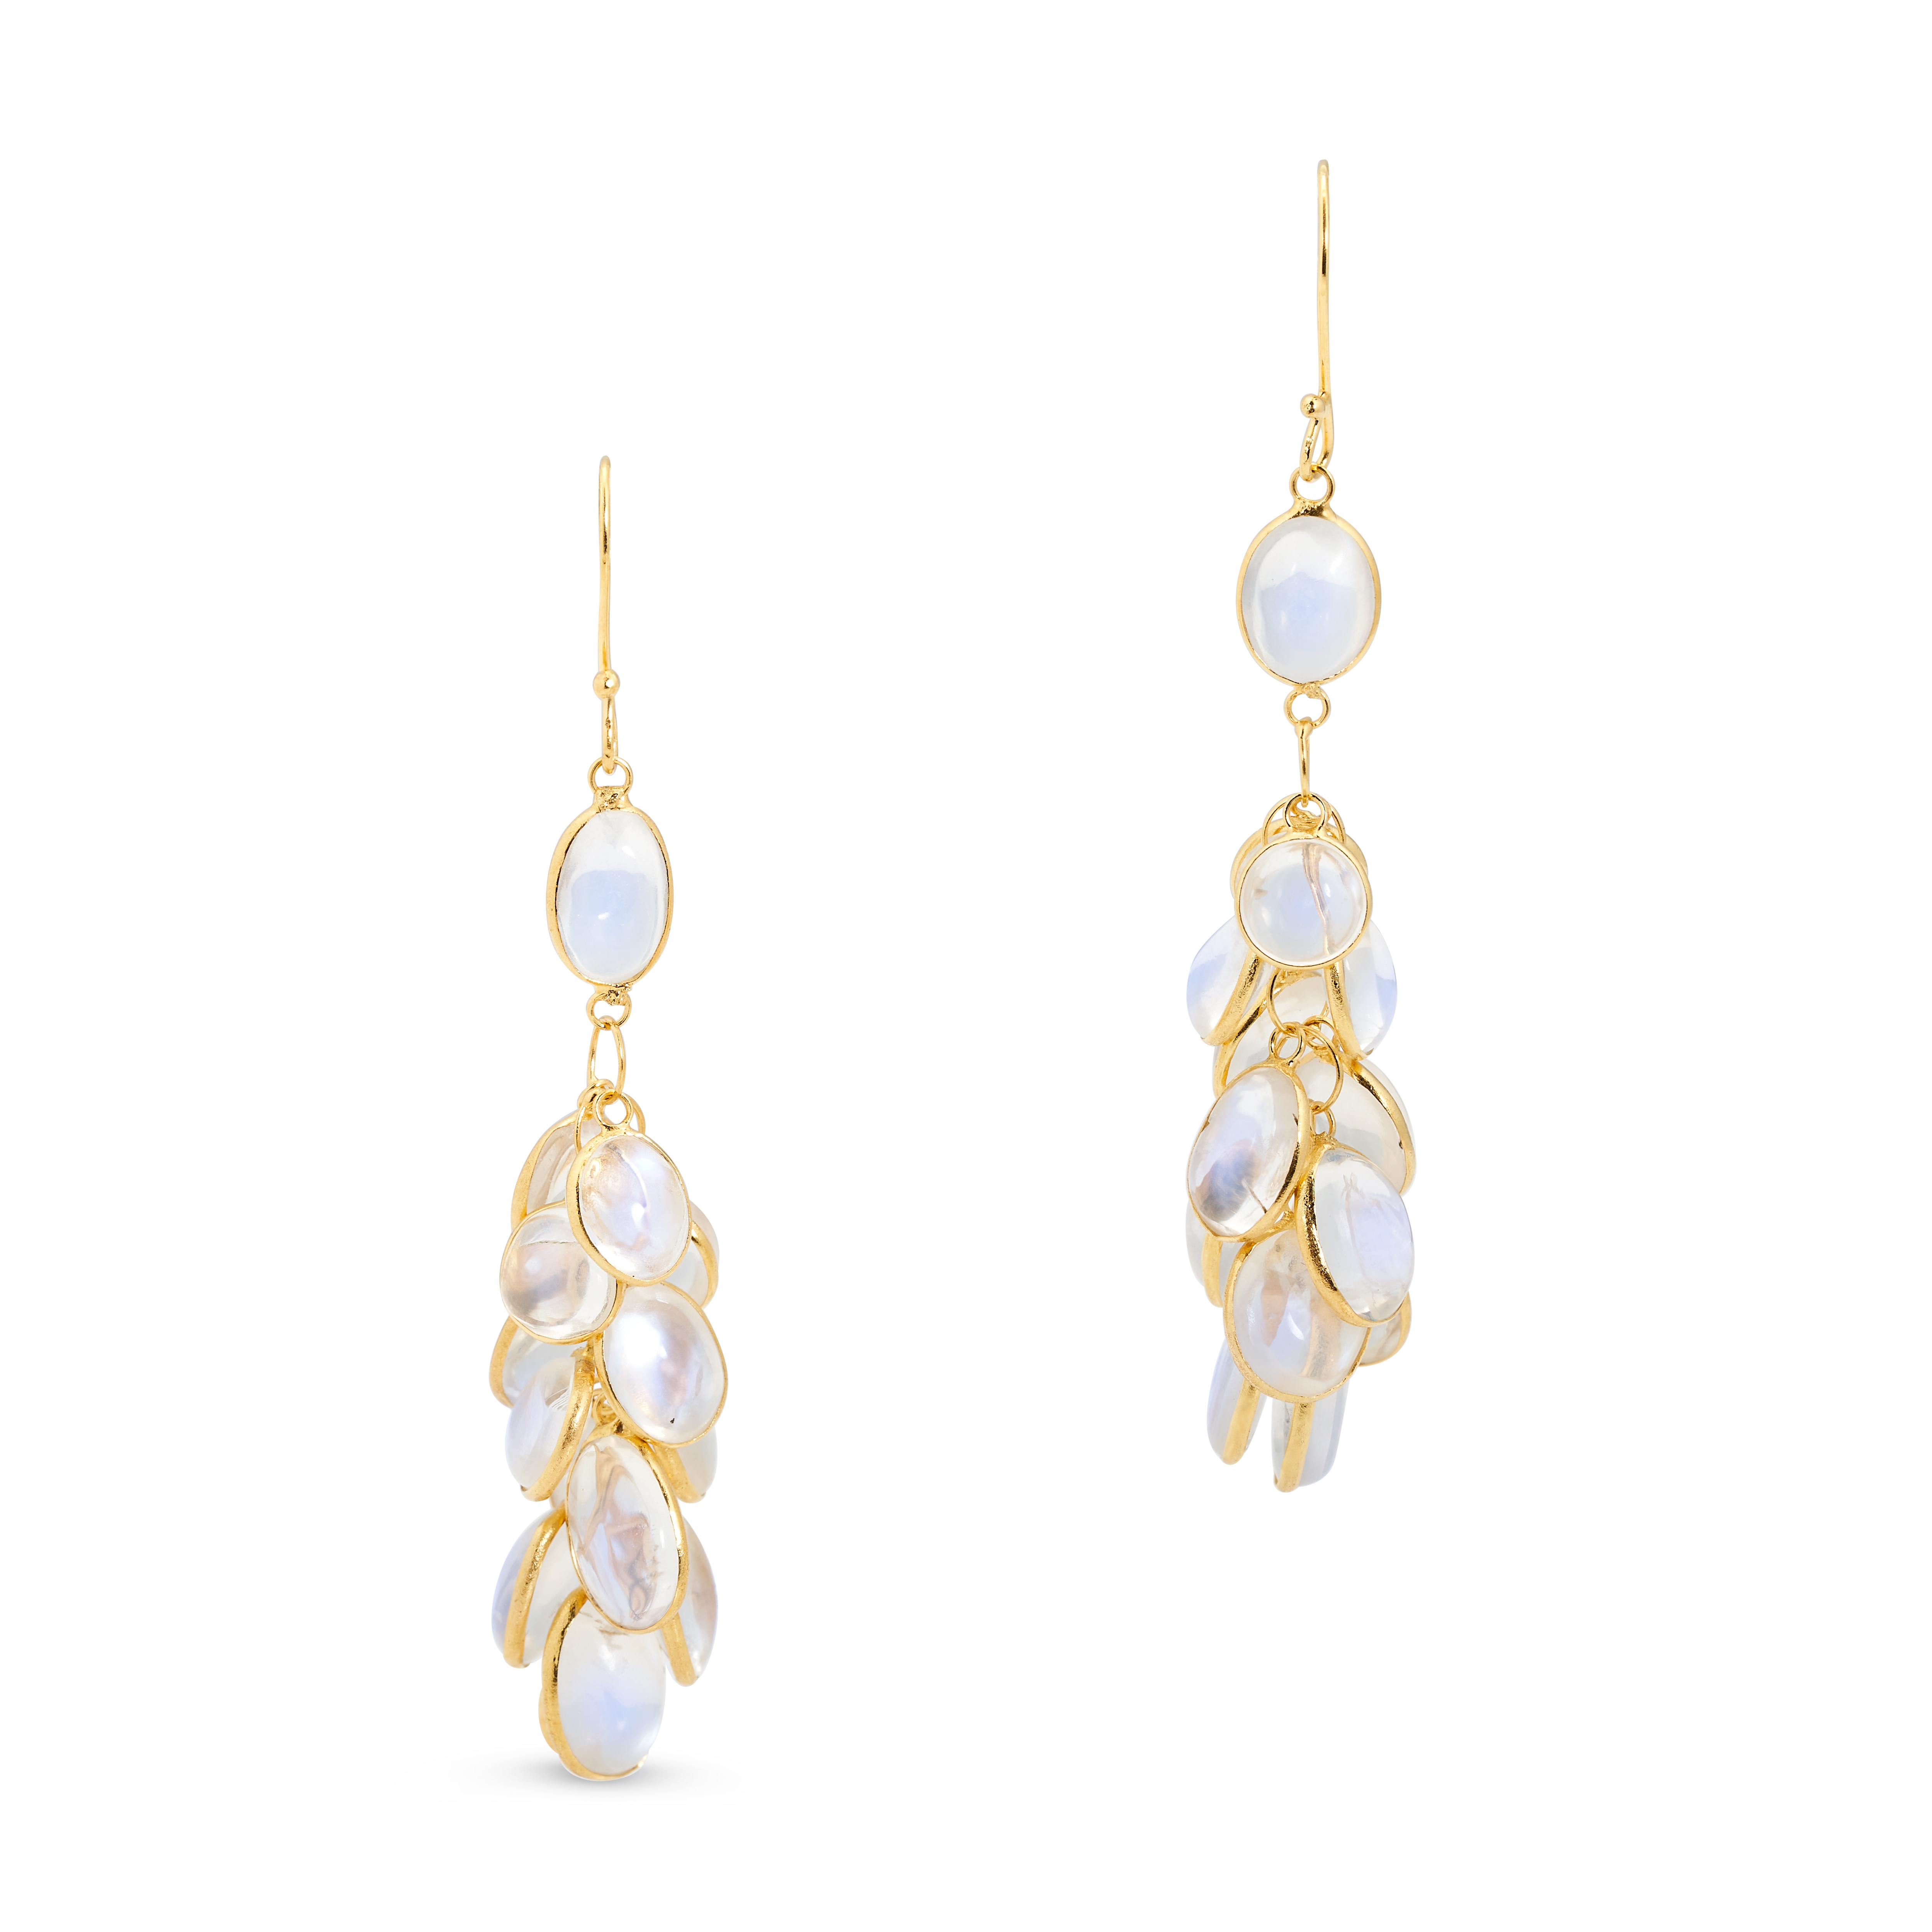 A PAIR OF MOONSTONE CLUSTER DROP EARRINGS in yellow gold, set with clusters of cabochon moonstone...